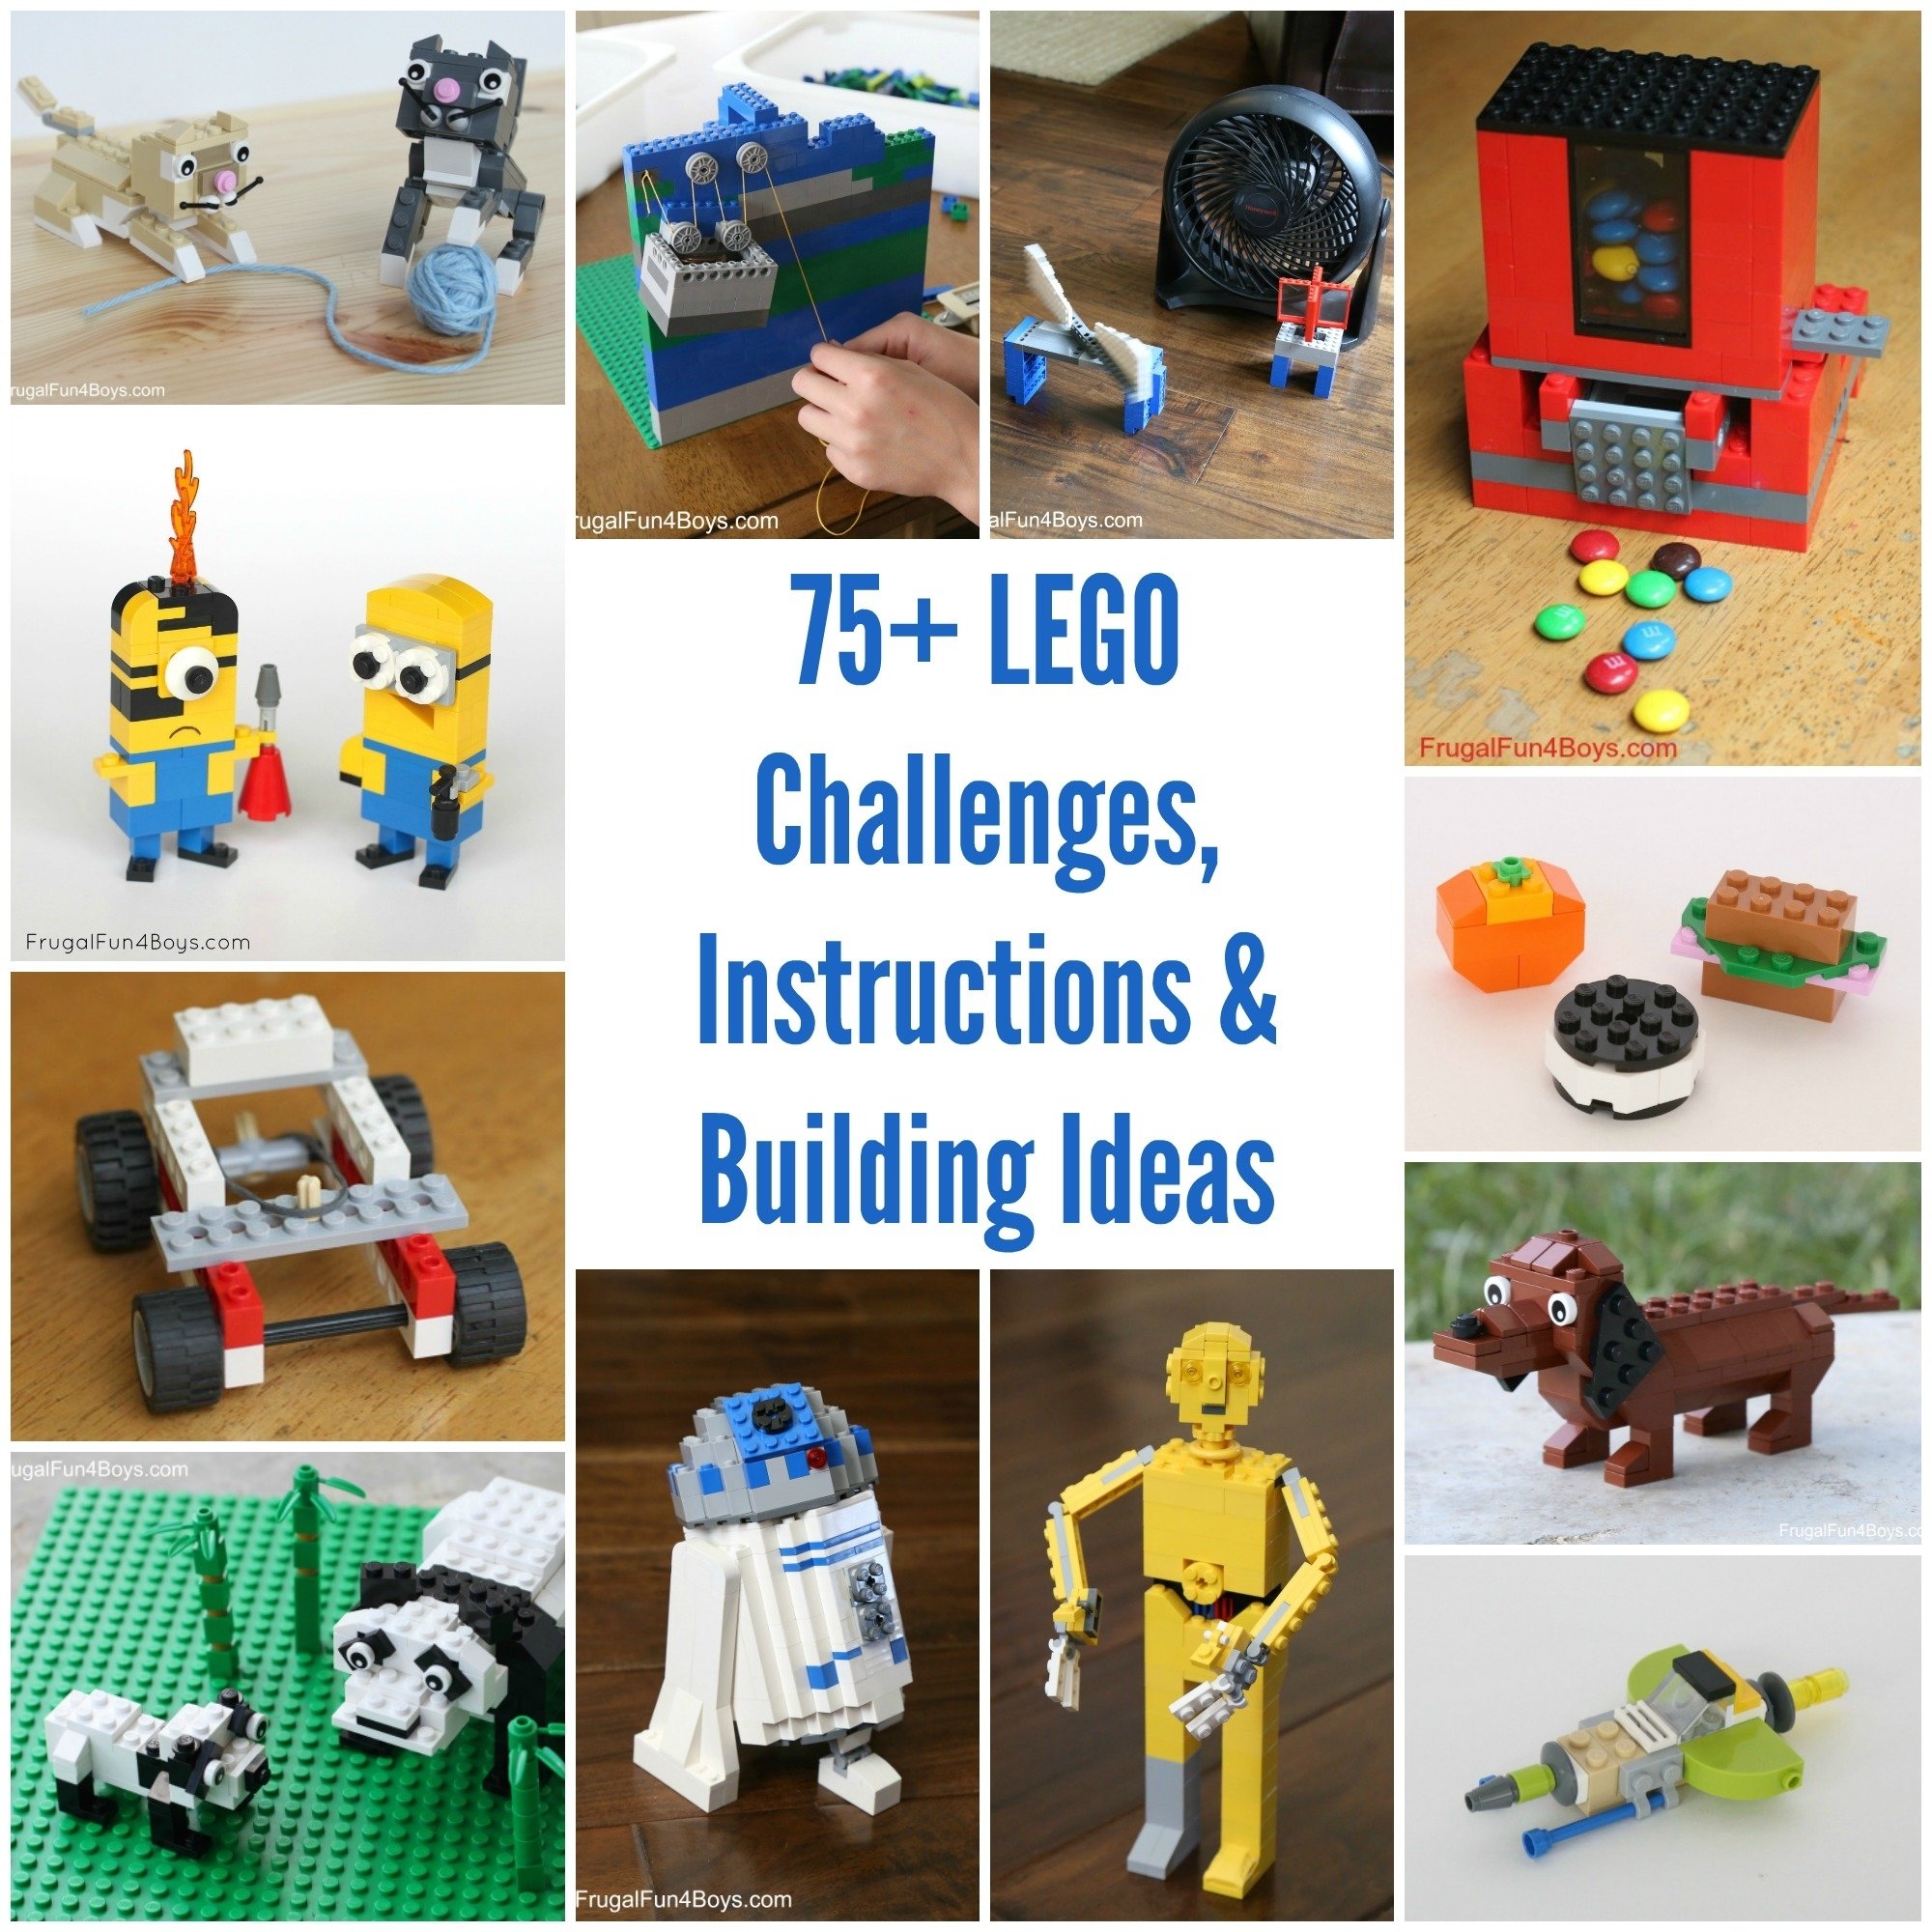 10 Trendy Lego Building Ideas And Instructions 50 lego building projects for kids 1 2022